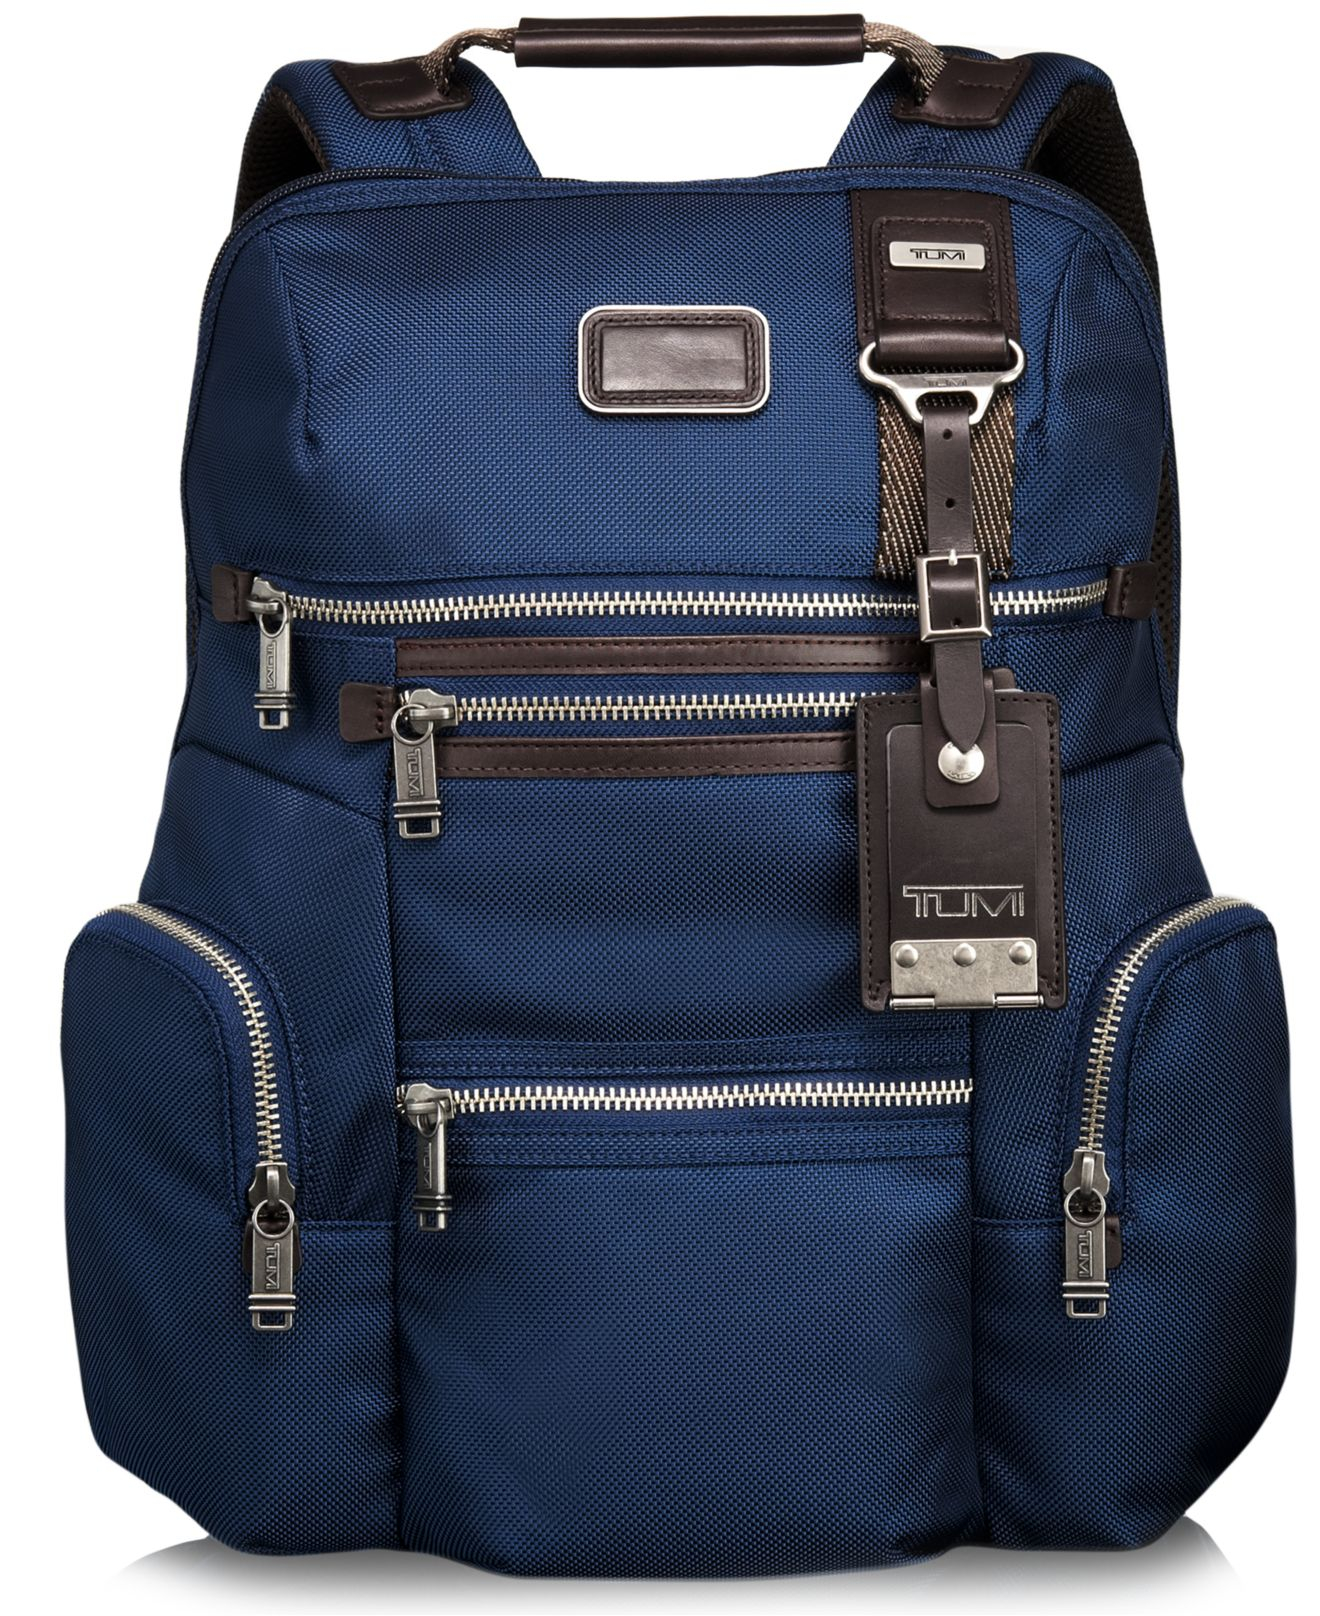 Lyst - Tumi Alpha Bravo Knox Backpack in Blue for Men